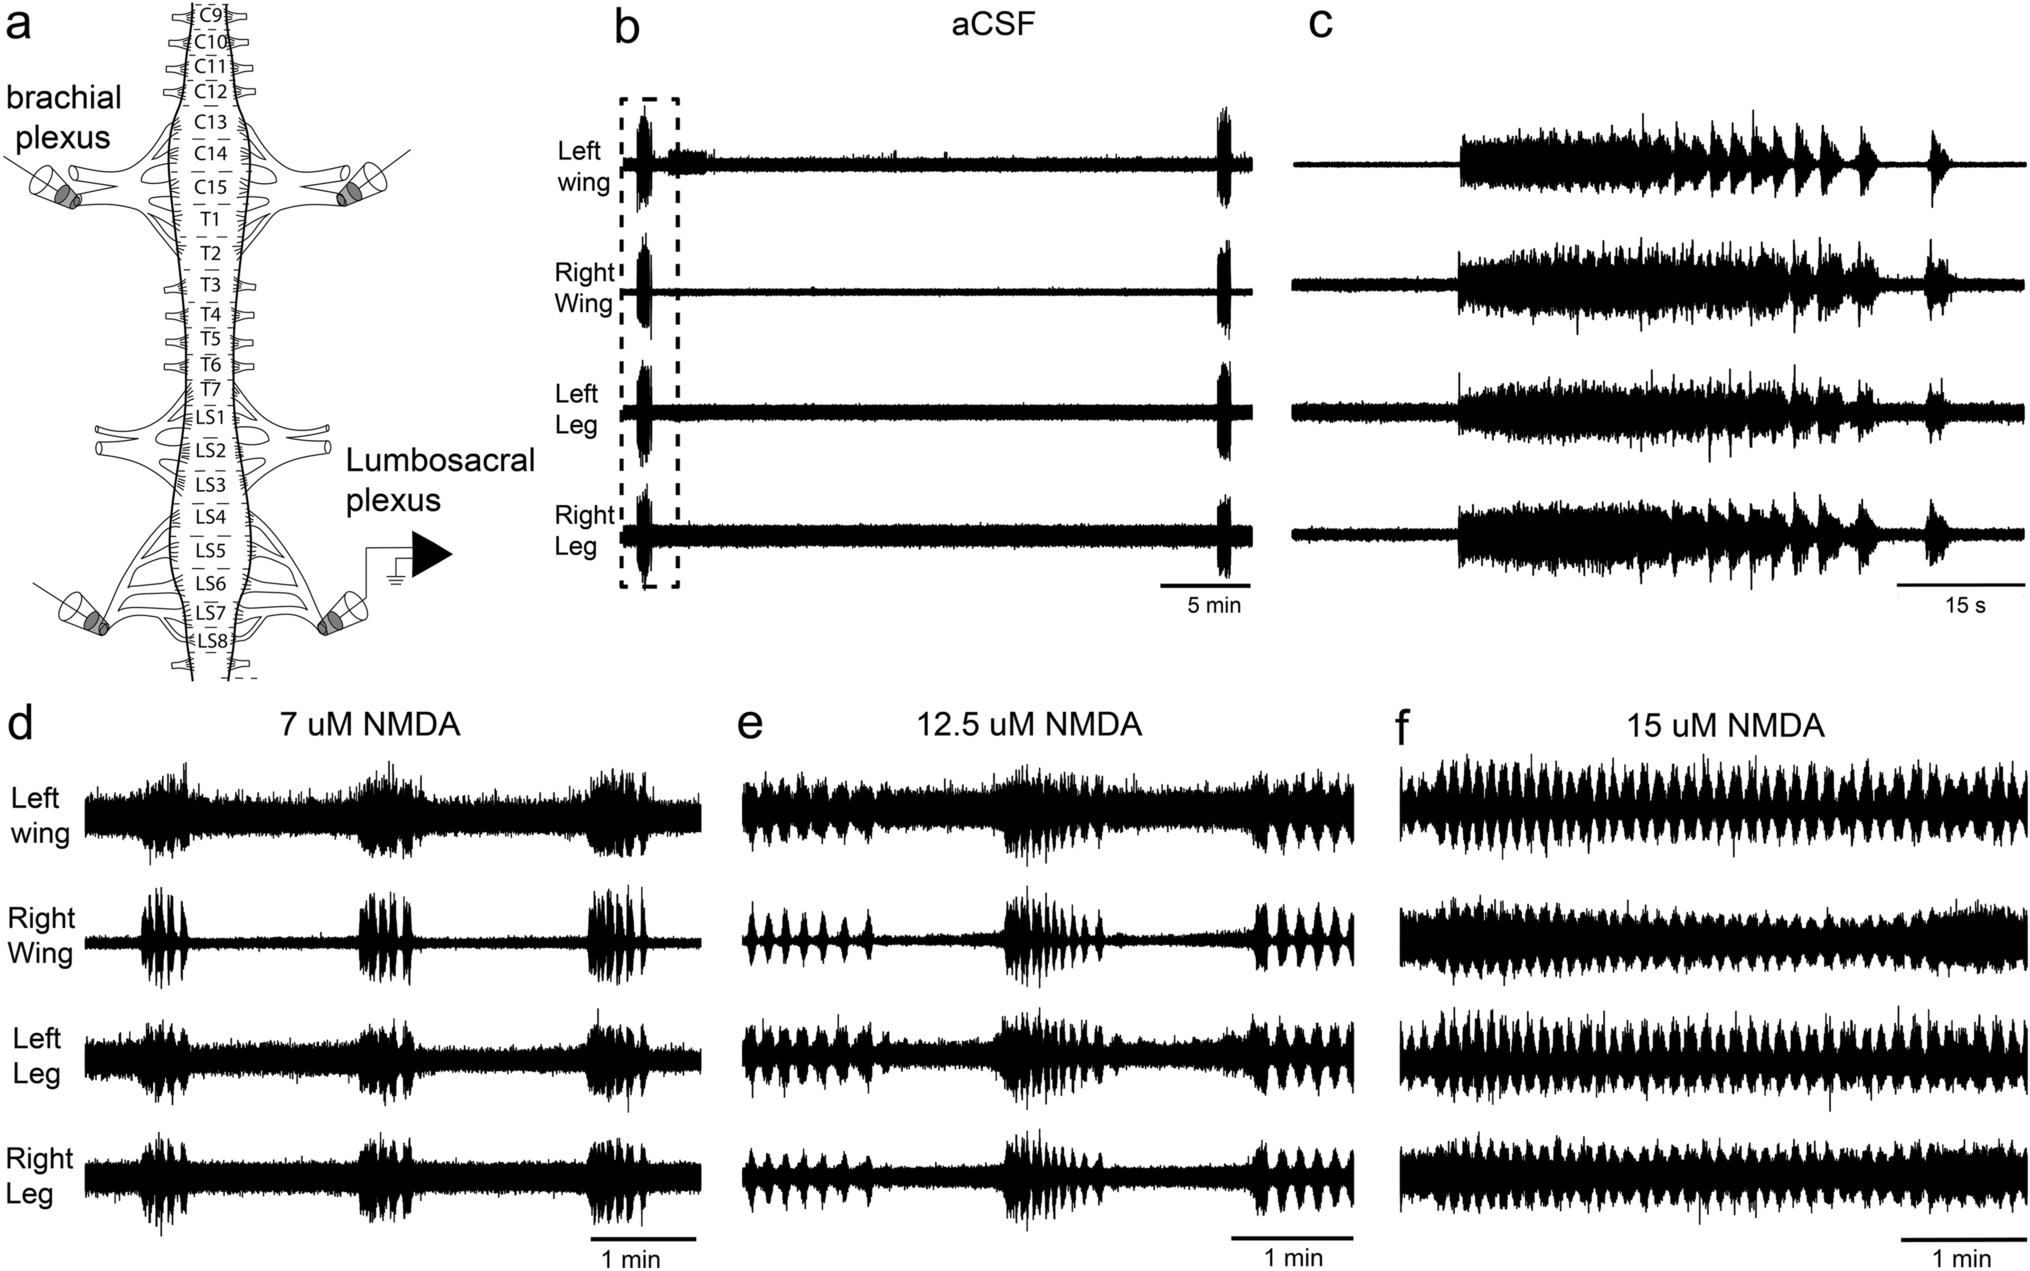 Investigation of central pattern generators in the spinal cord of chicken embryos